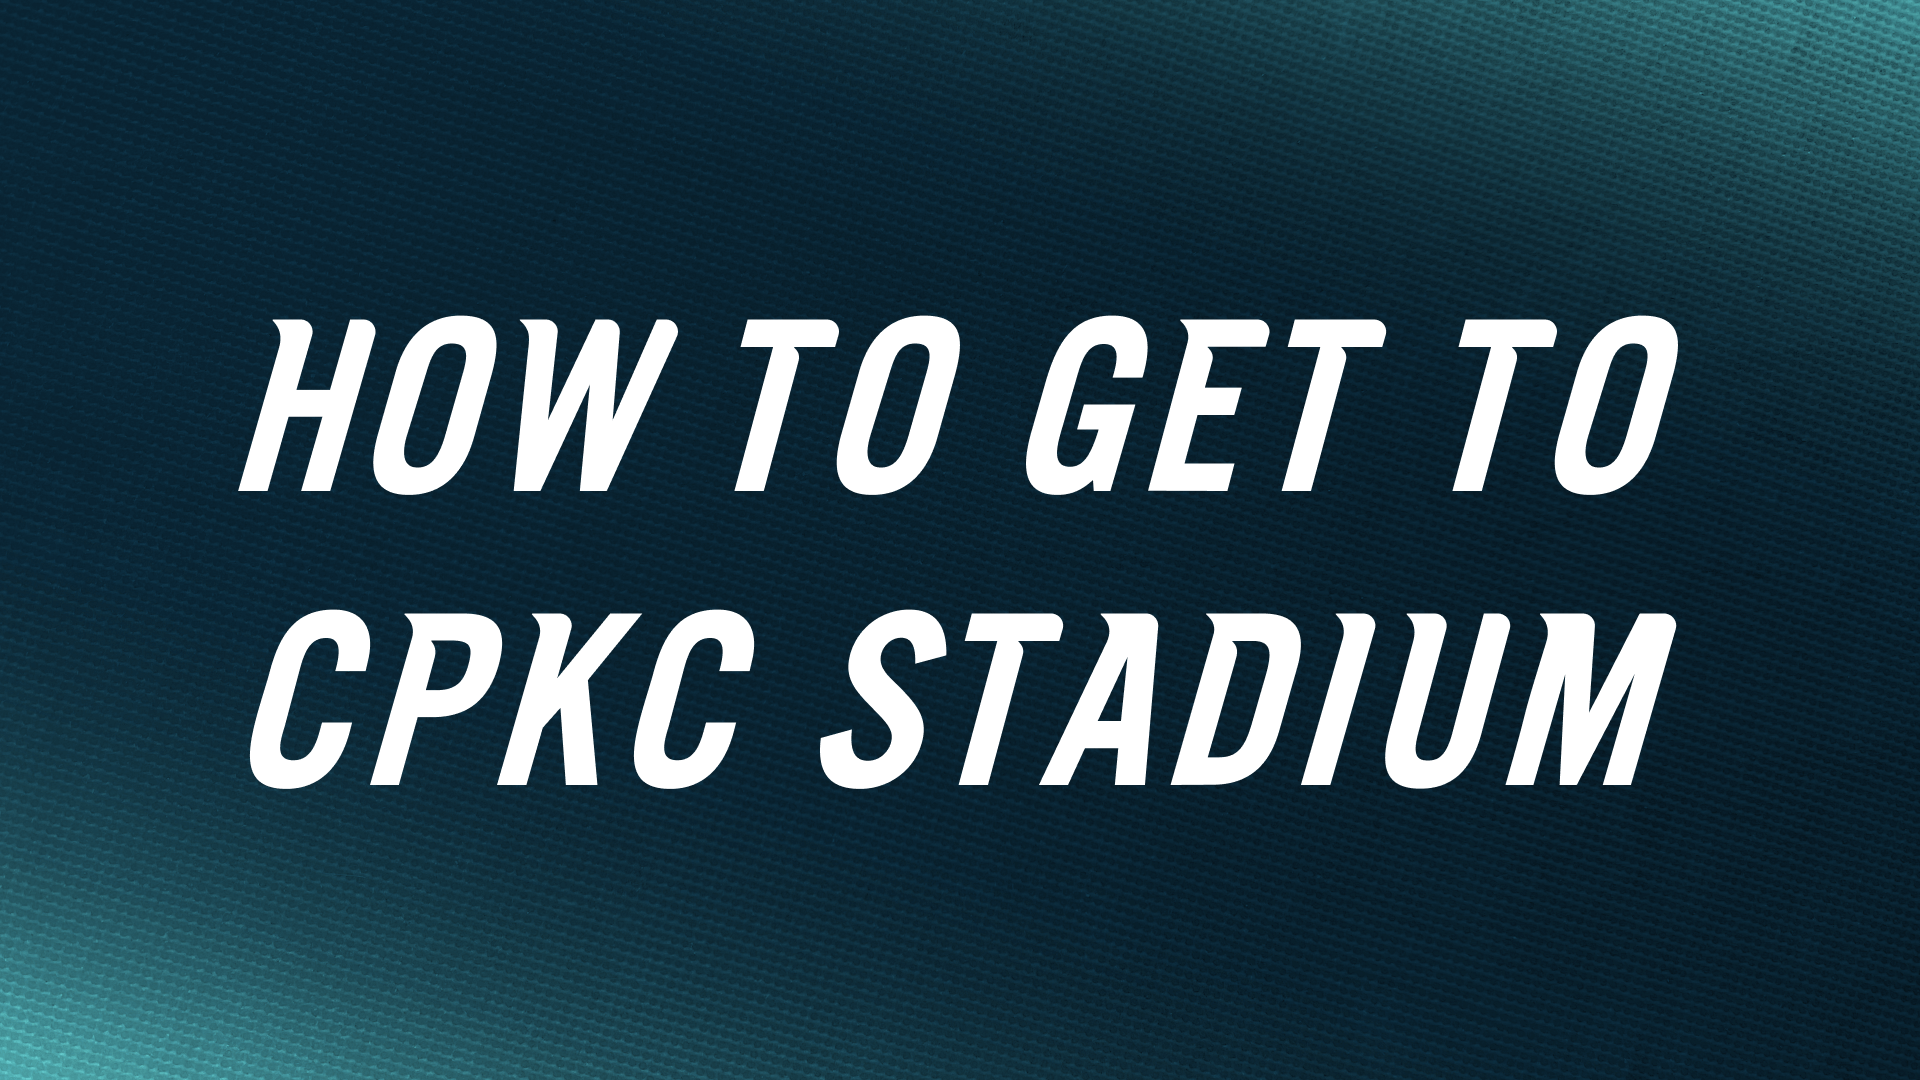 A graphic with the text "How To Get To CPKC Stadium" on a navy background.